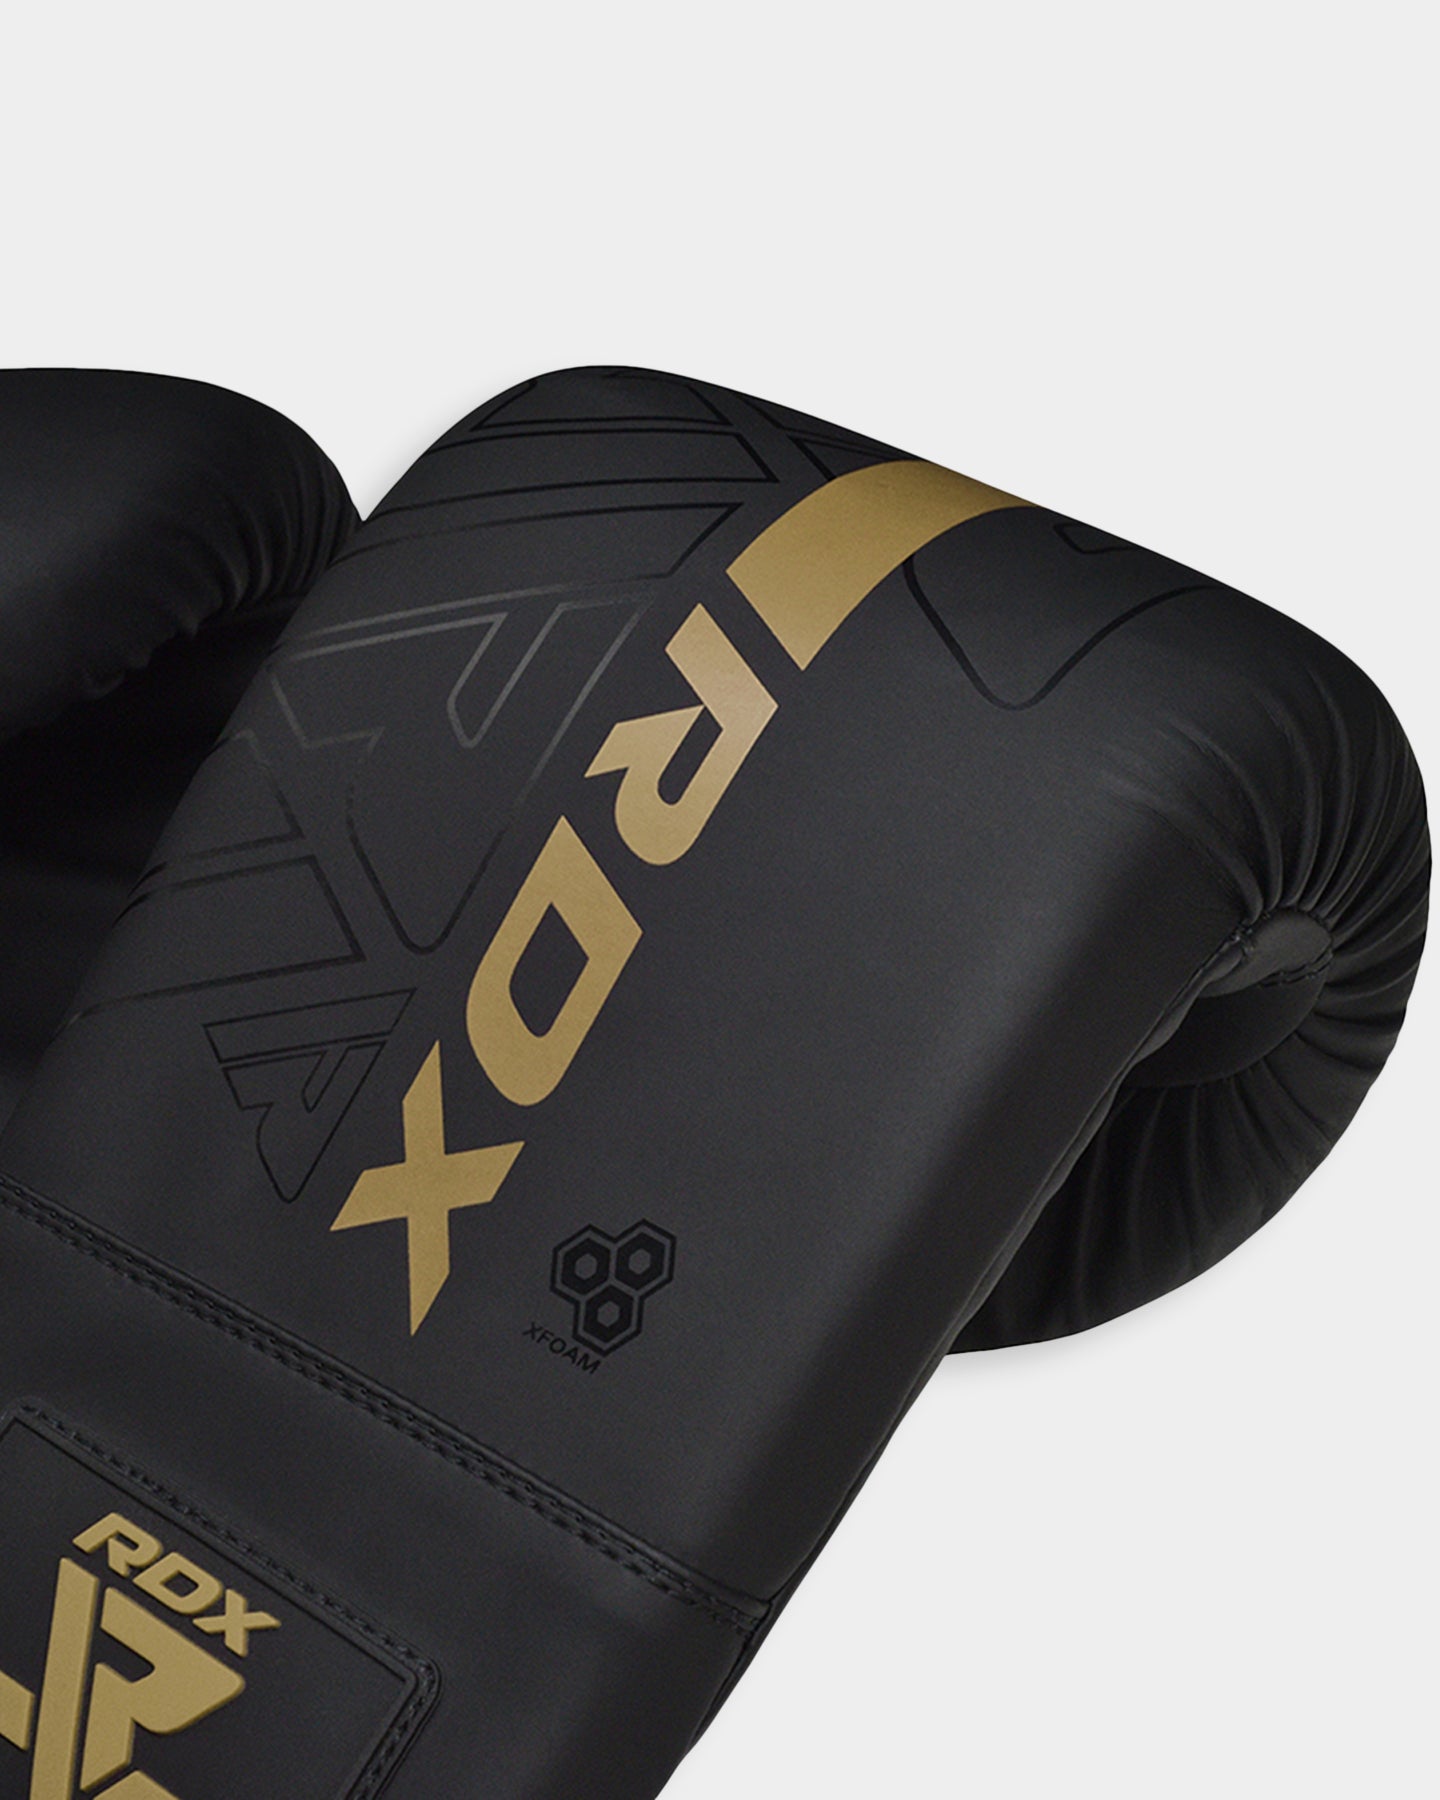 RDX Sports BOXING BAG MITTS F6, Standard Size, Golden A2